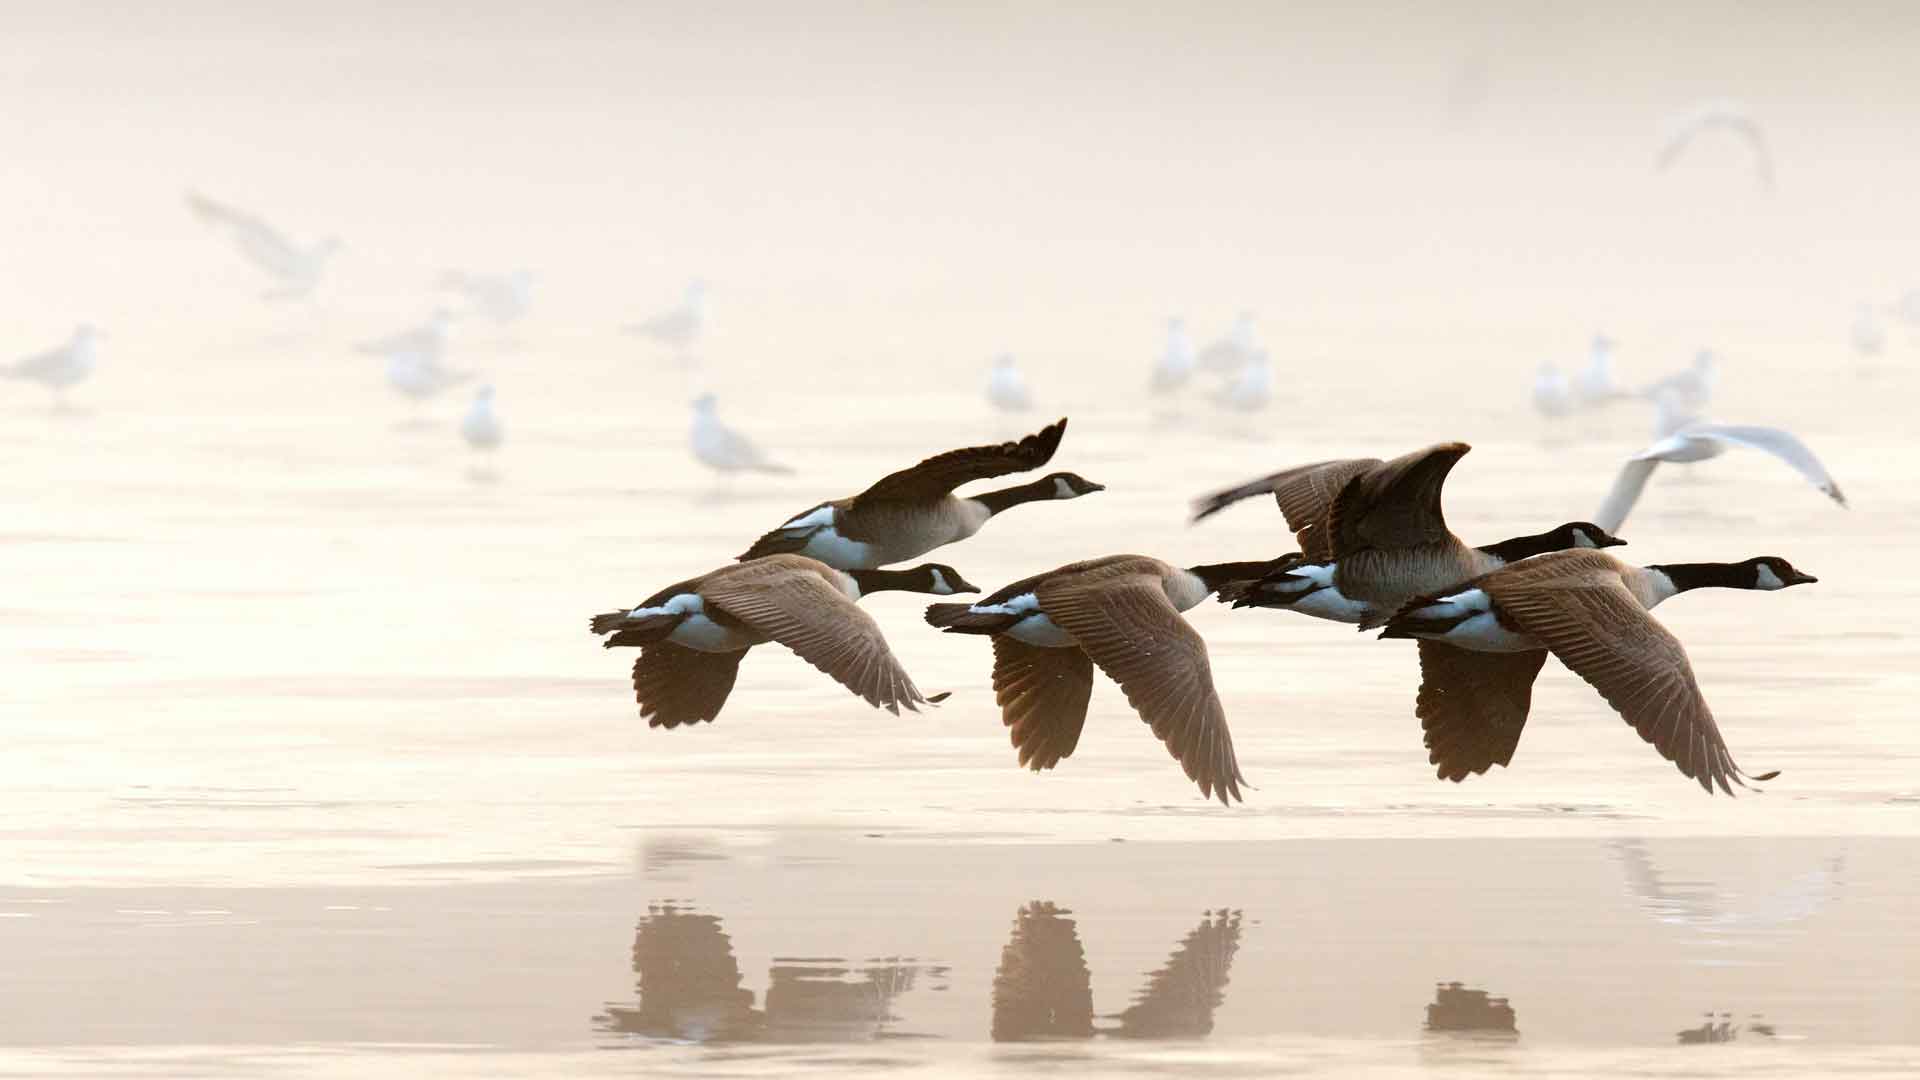 Canada geese flying over wet sand